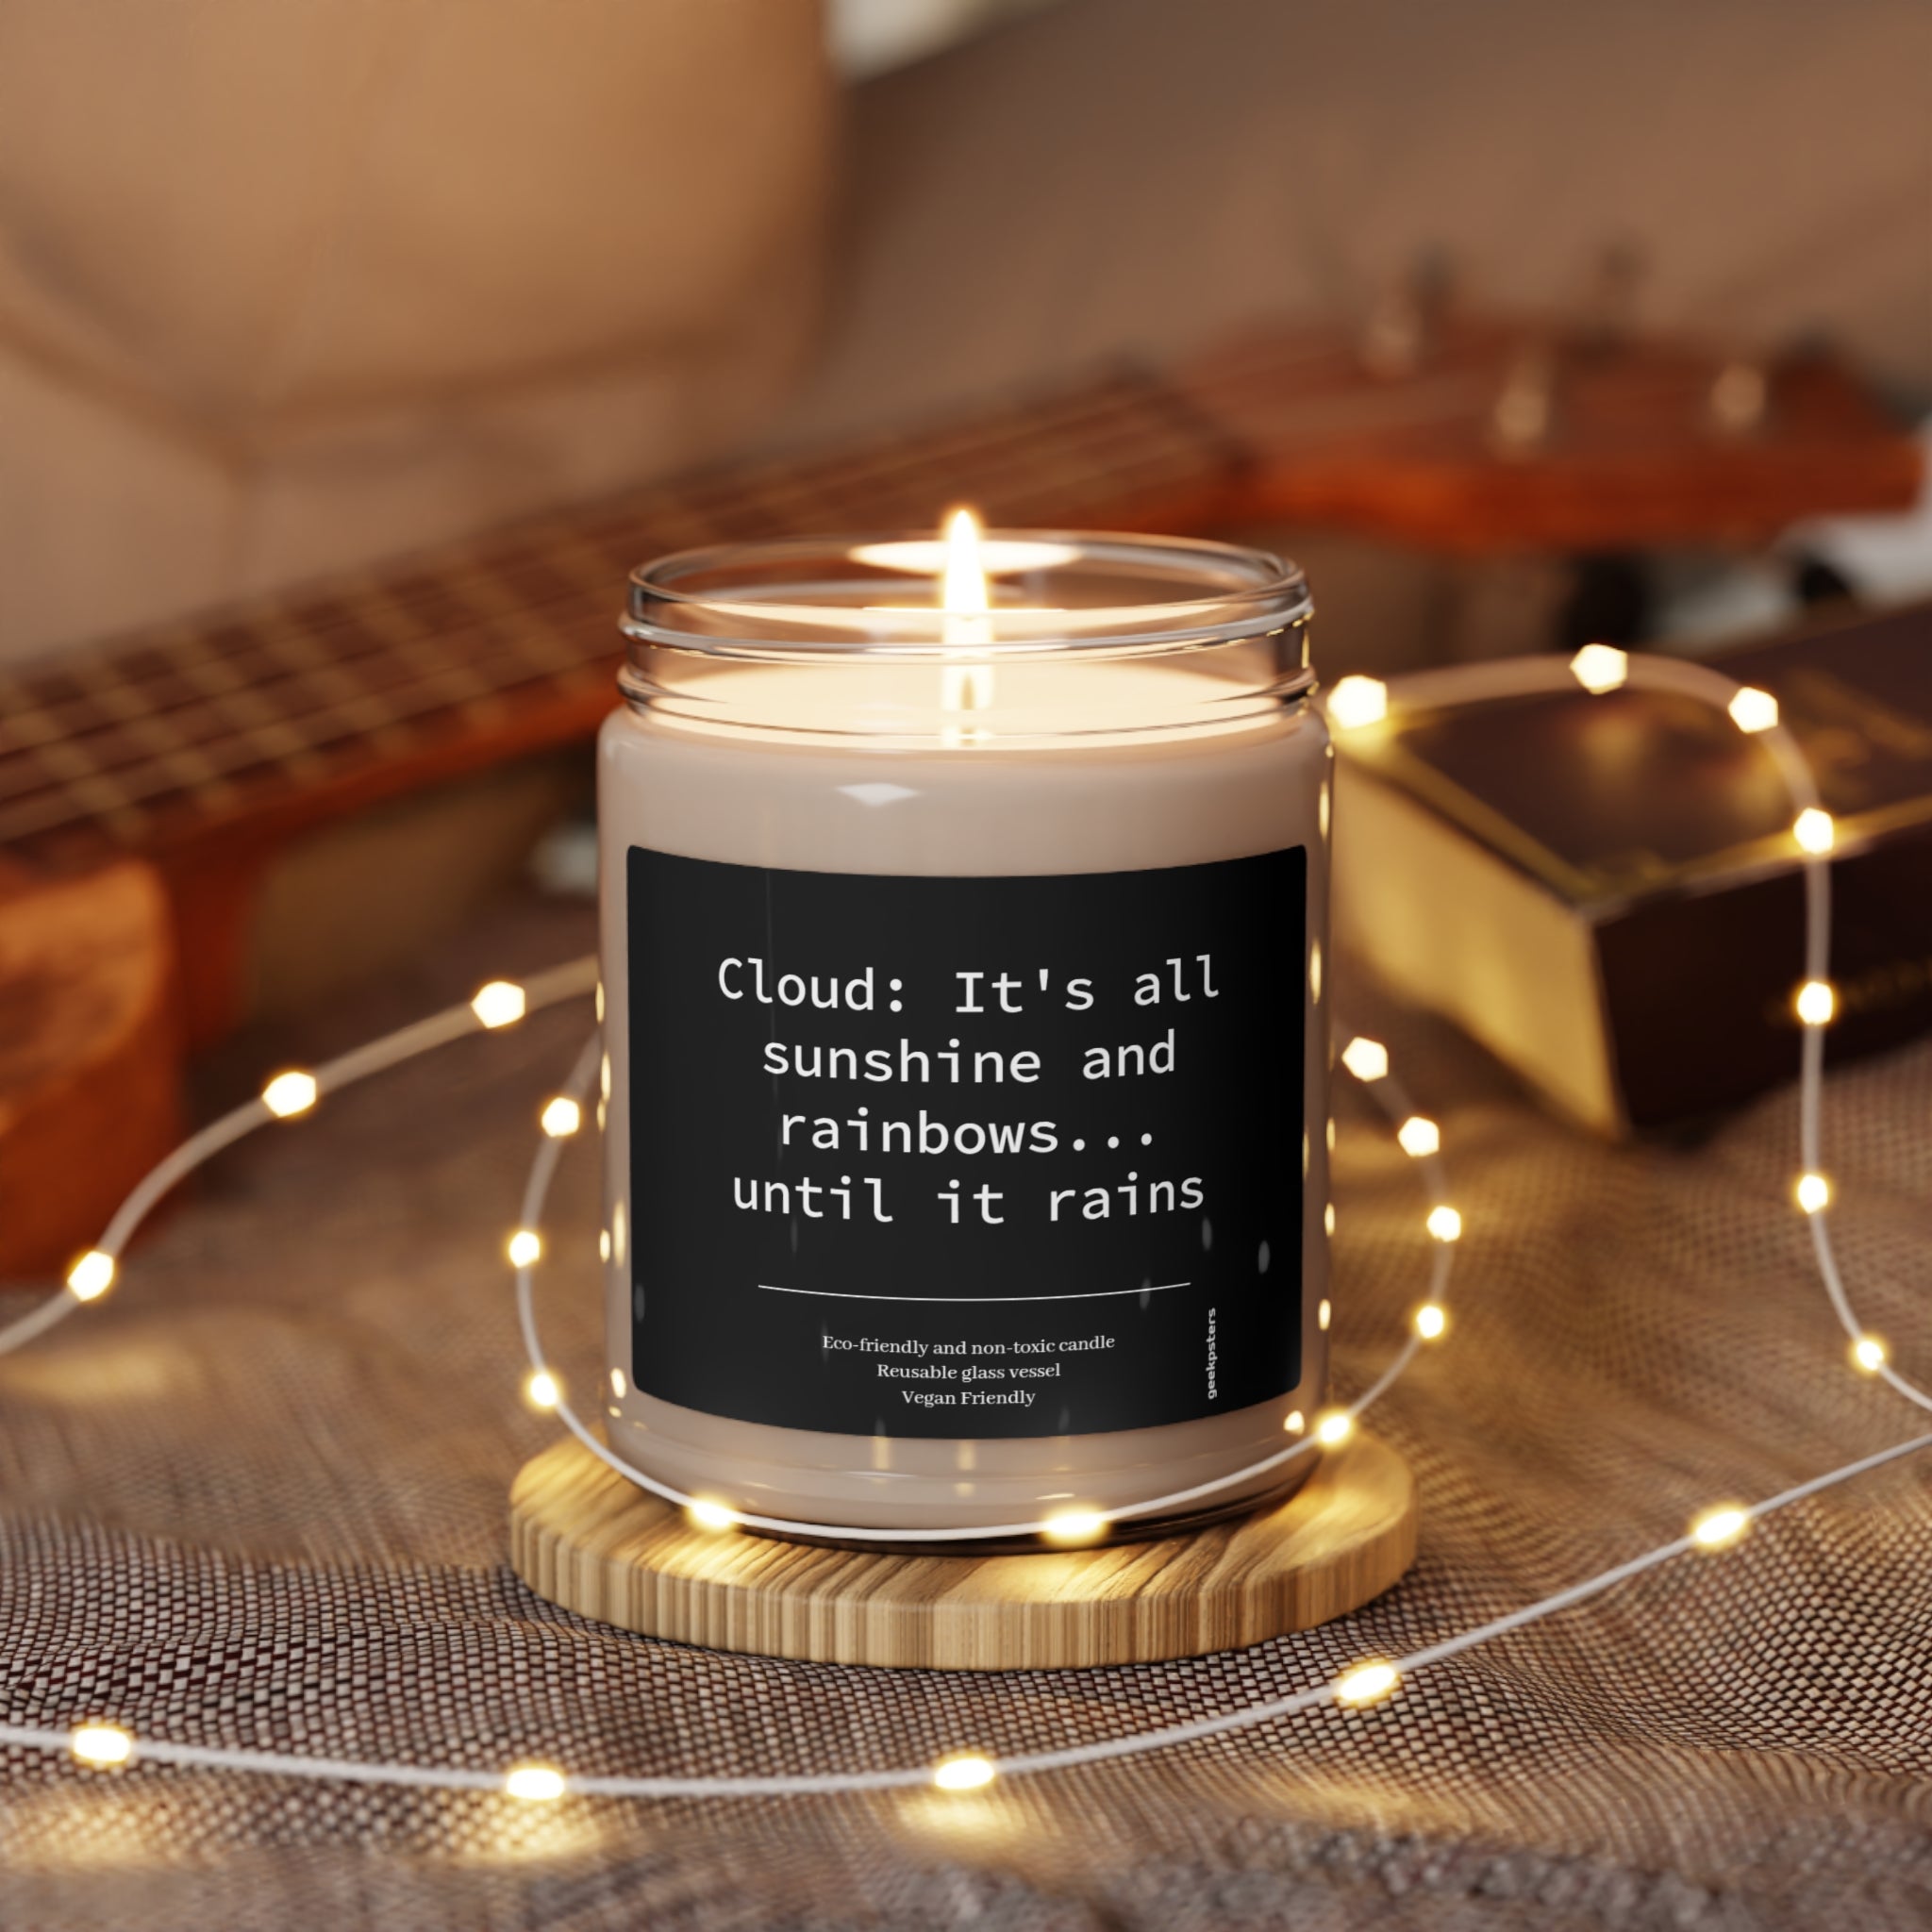 A lit Cloud: Its All Sunshine and Rainbow..until its Rain scented candle made from a soy wax blend, with a humorous quote on the label, surrounded by fairy lights.